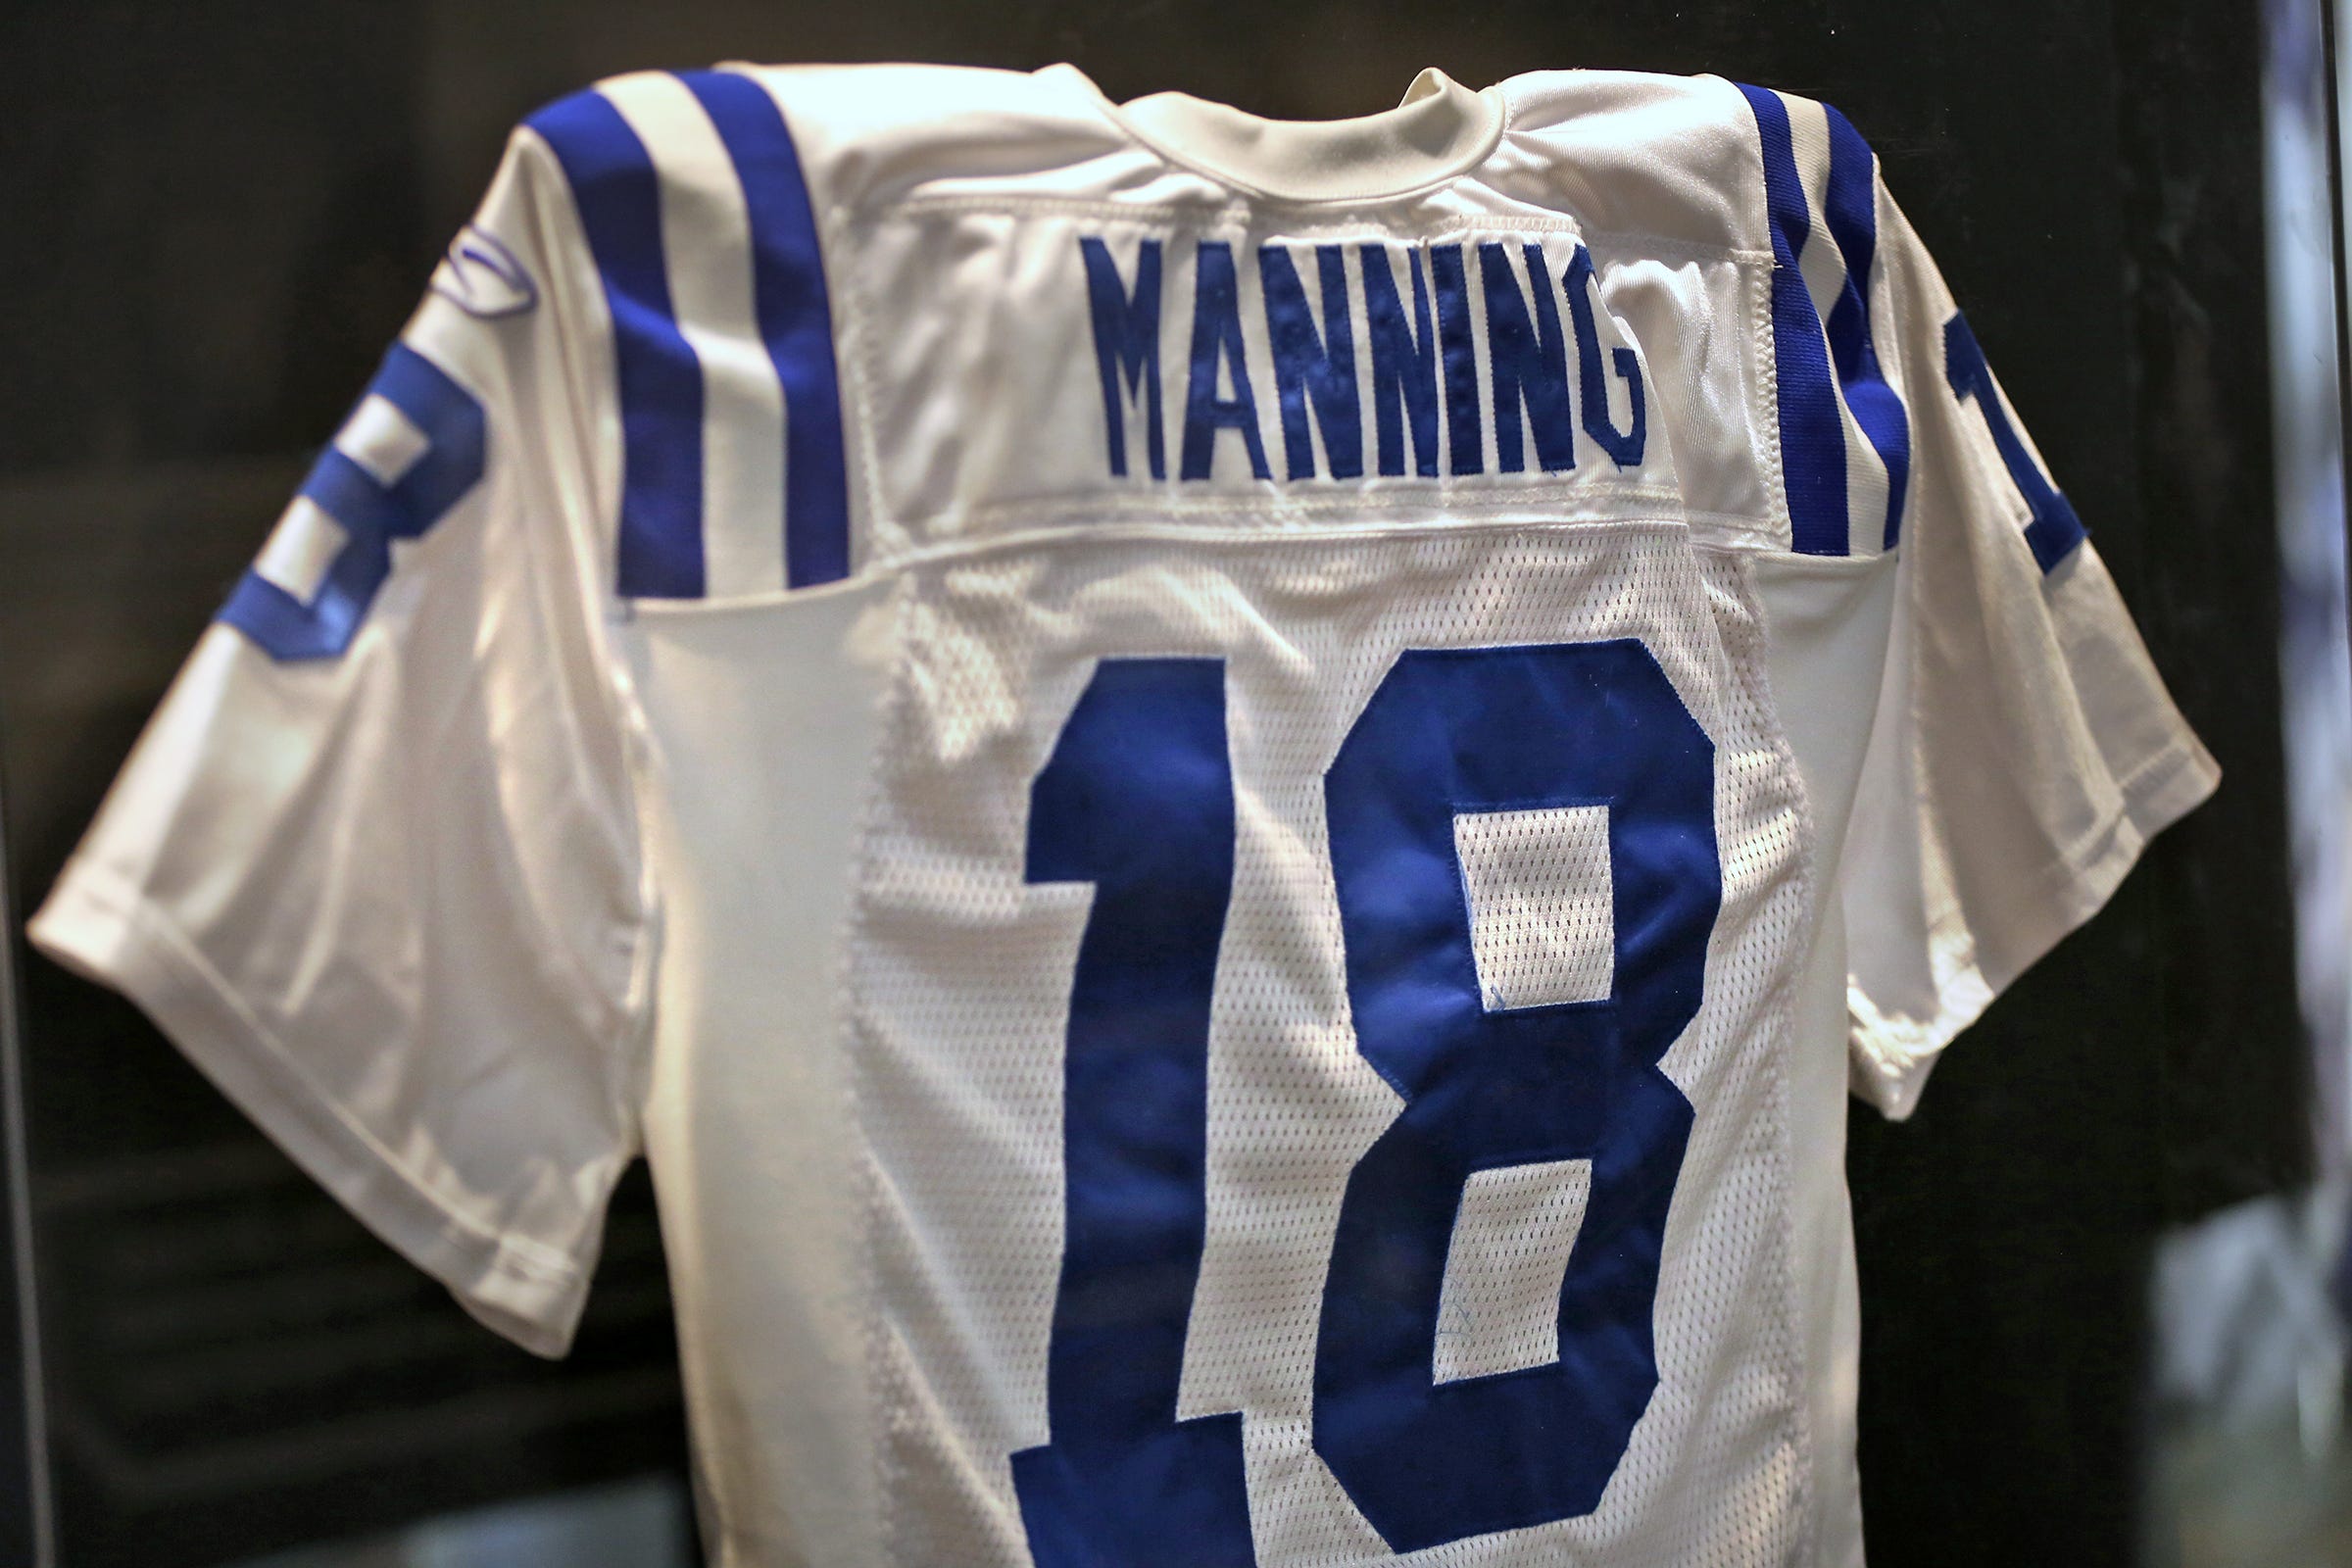 colts jersey 2018